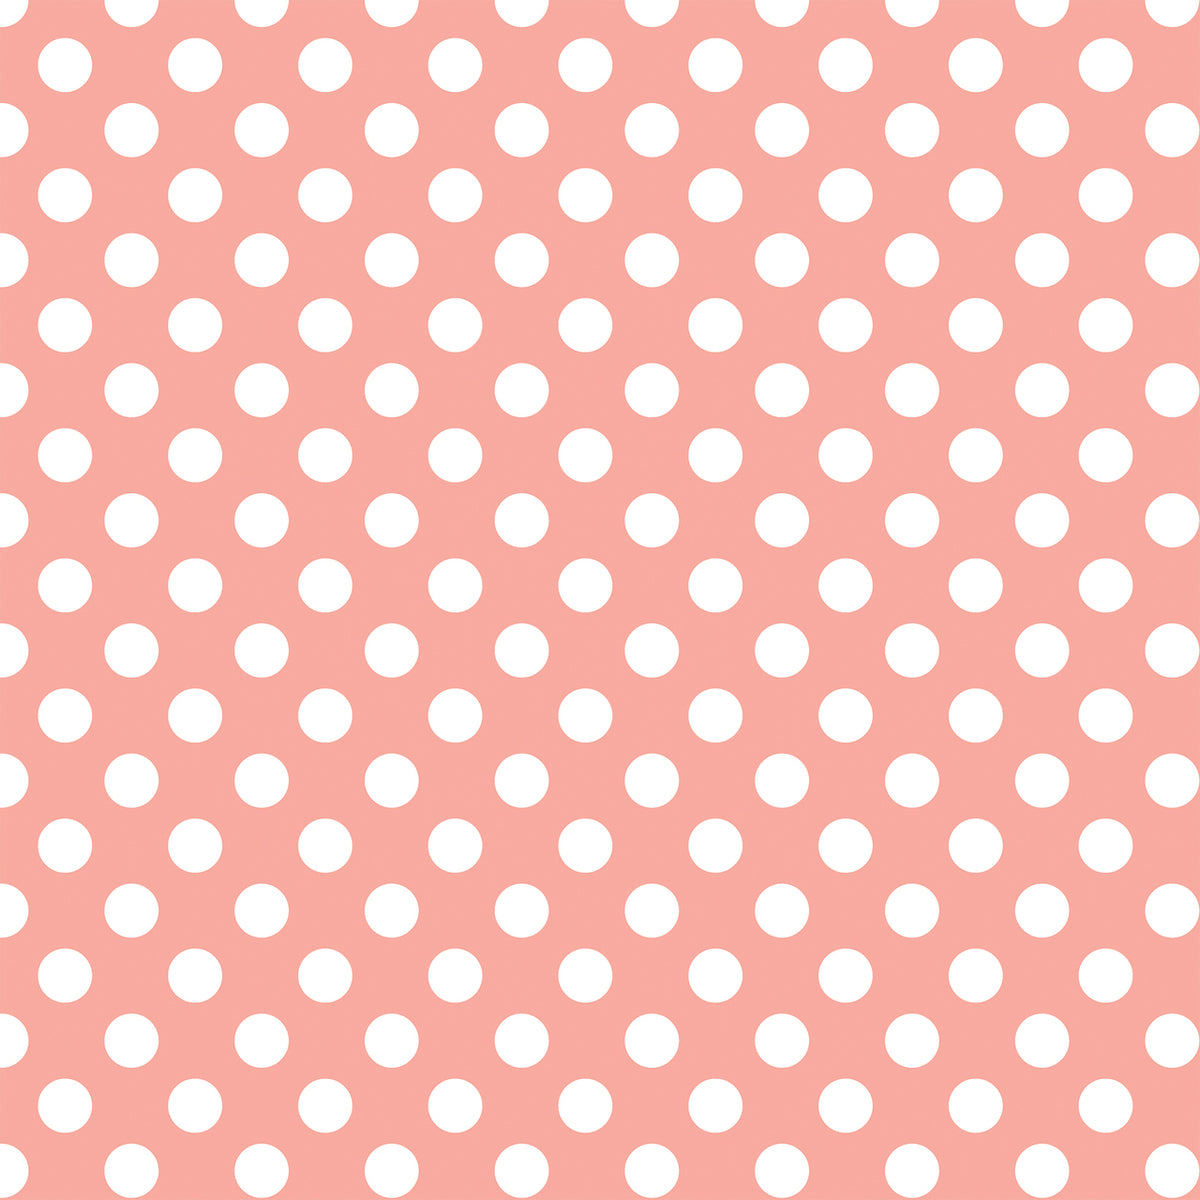 White dots on peach background - 12x12 cardstock from Echo Park Paper Co.